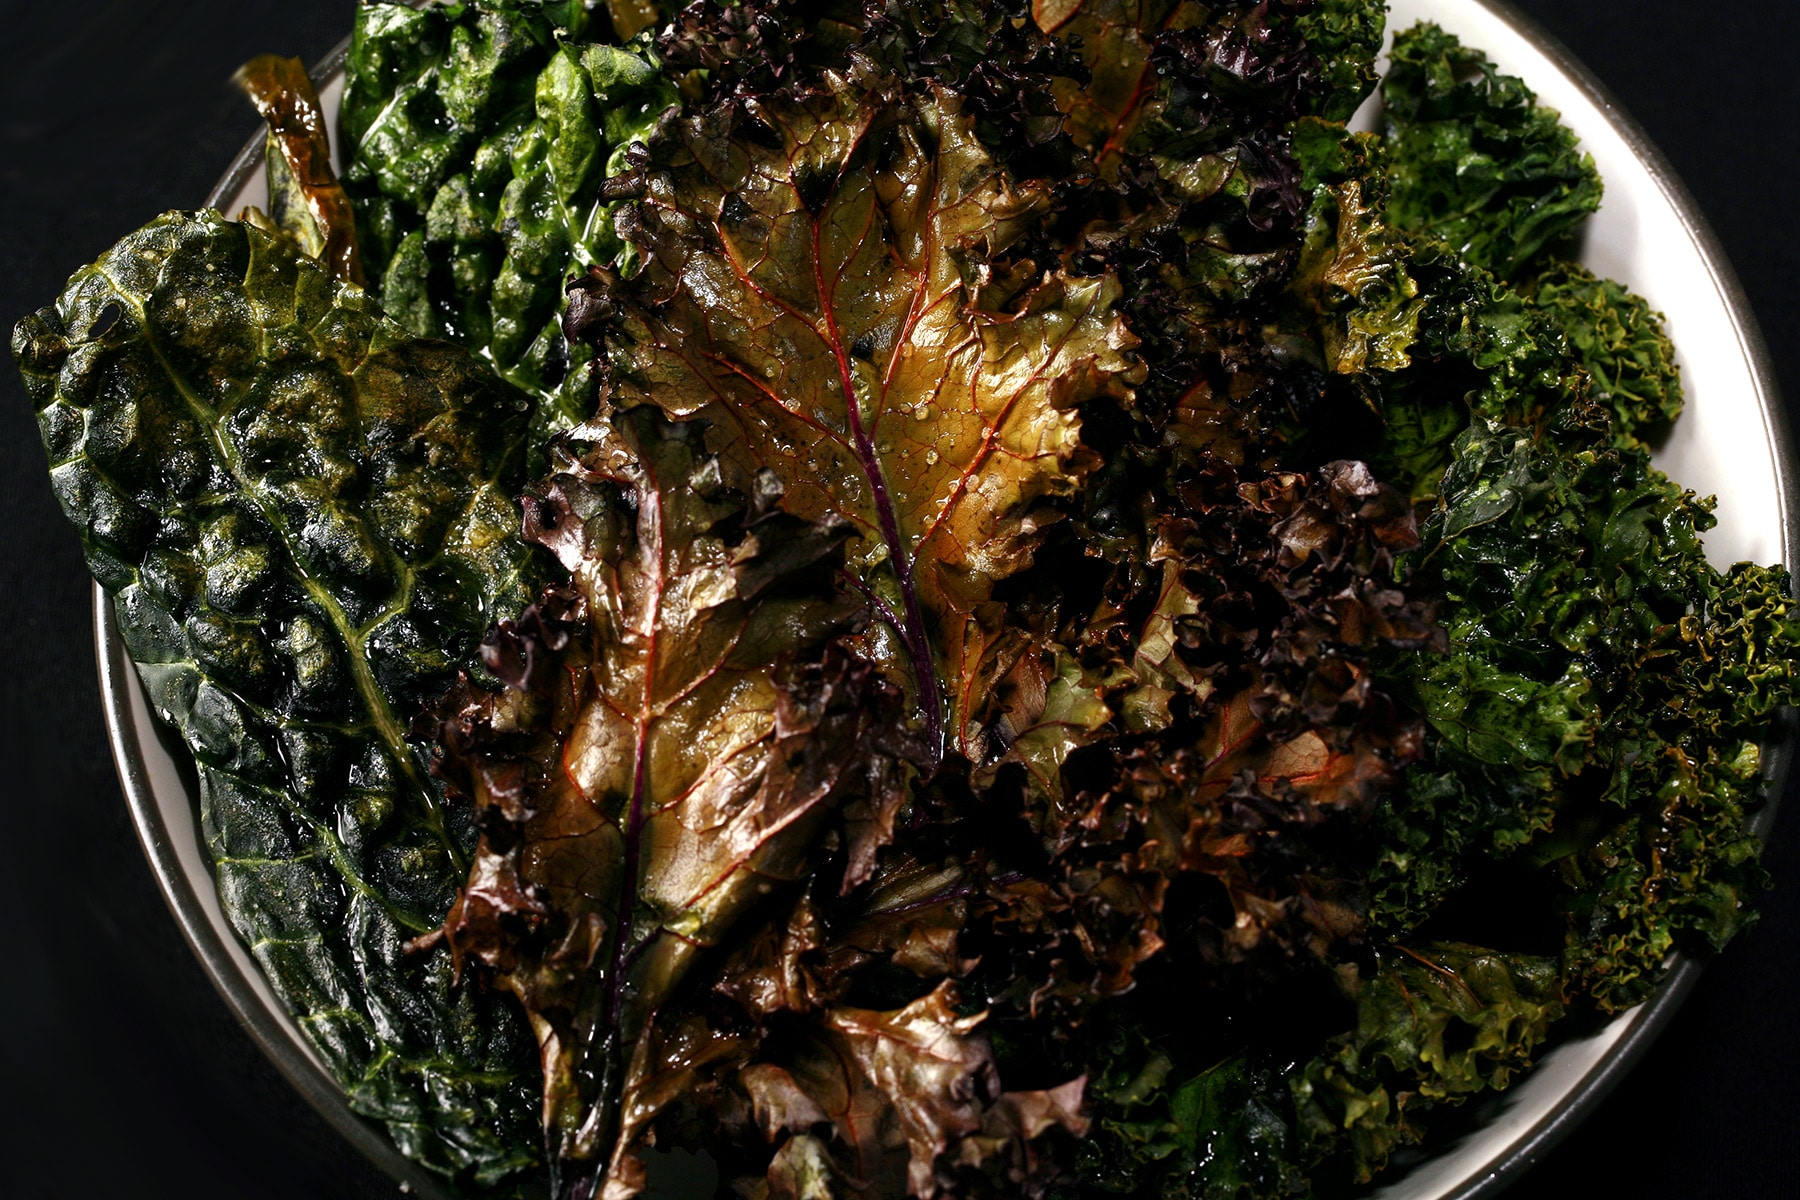 A bowl of chips made from various varieties of kale.